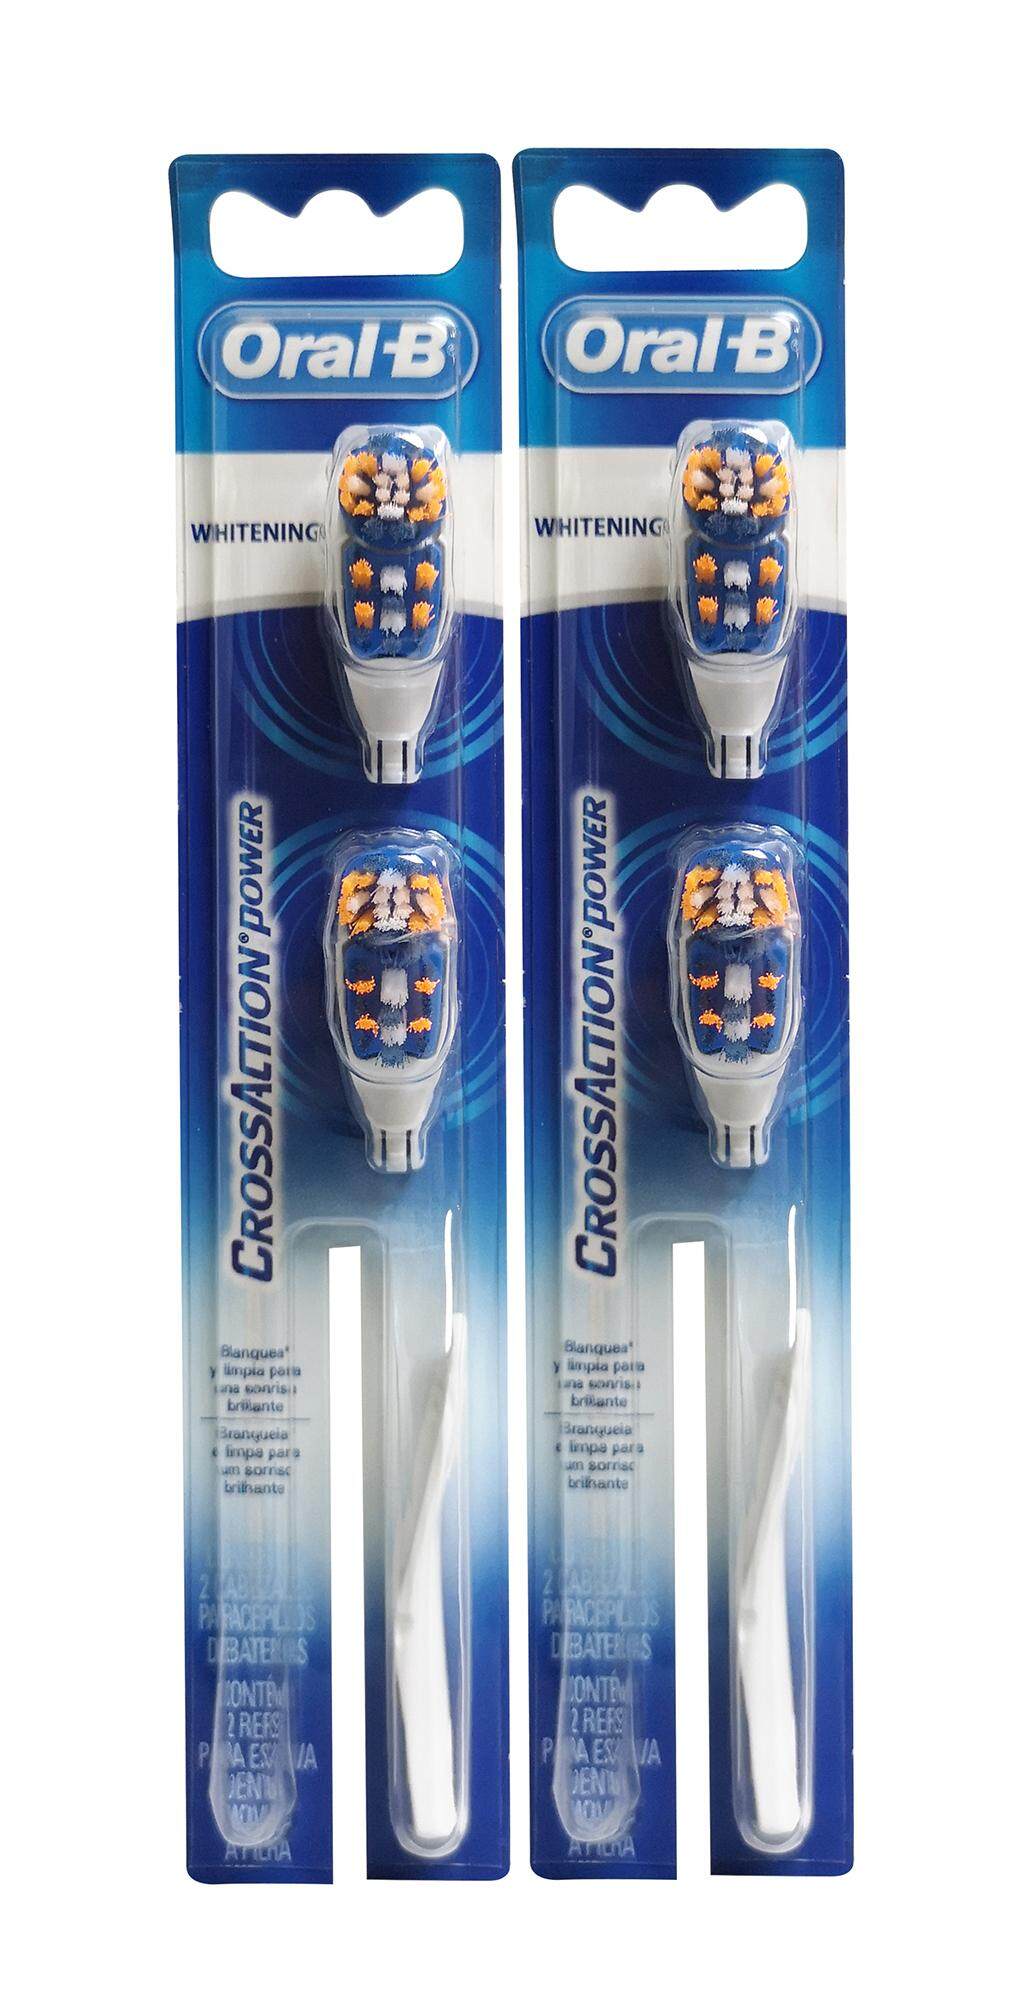 2 packs of Oral-B CrossAction Power Whitening Brush Head Set - Only fits to Model B1010 & B1011